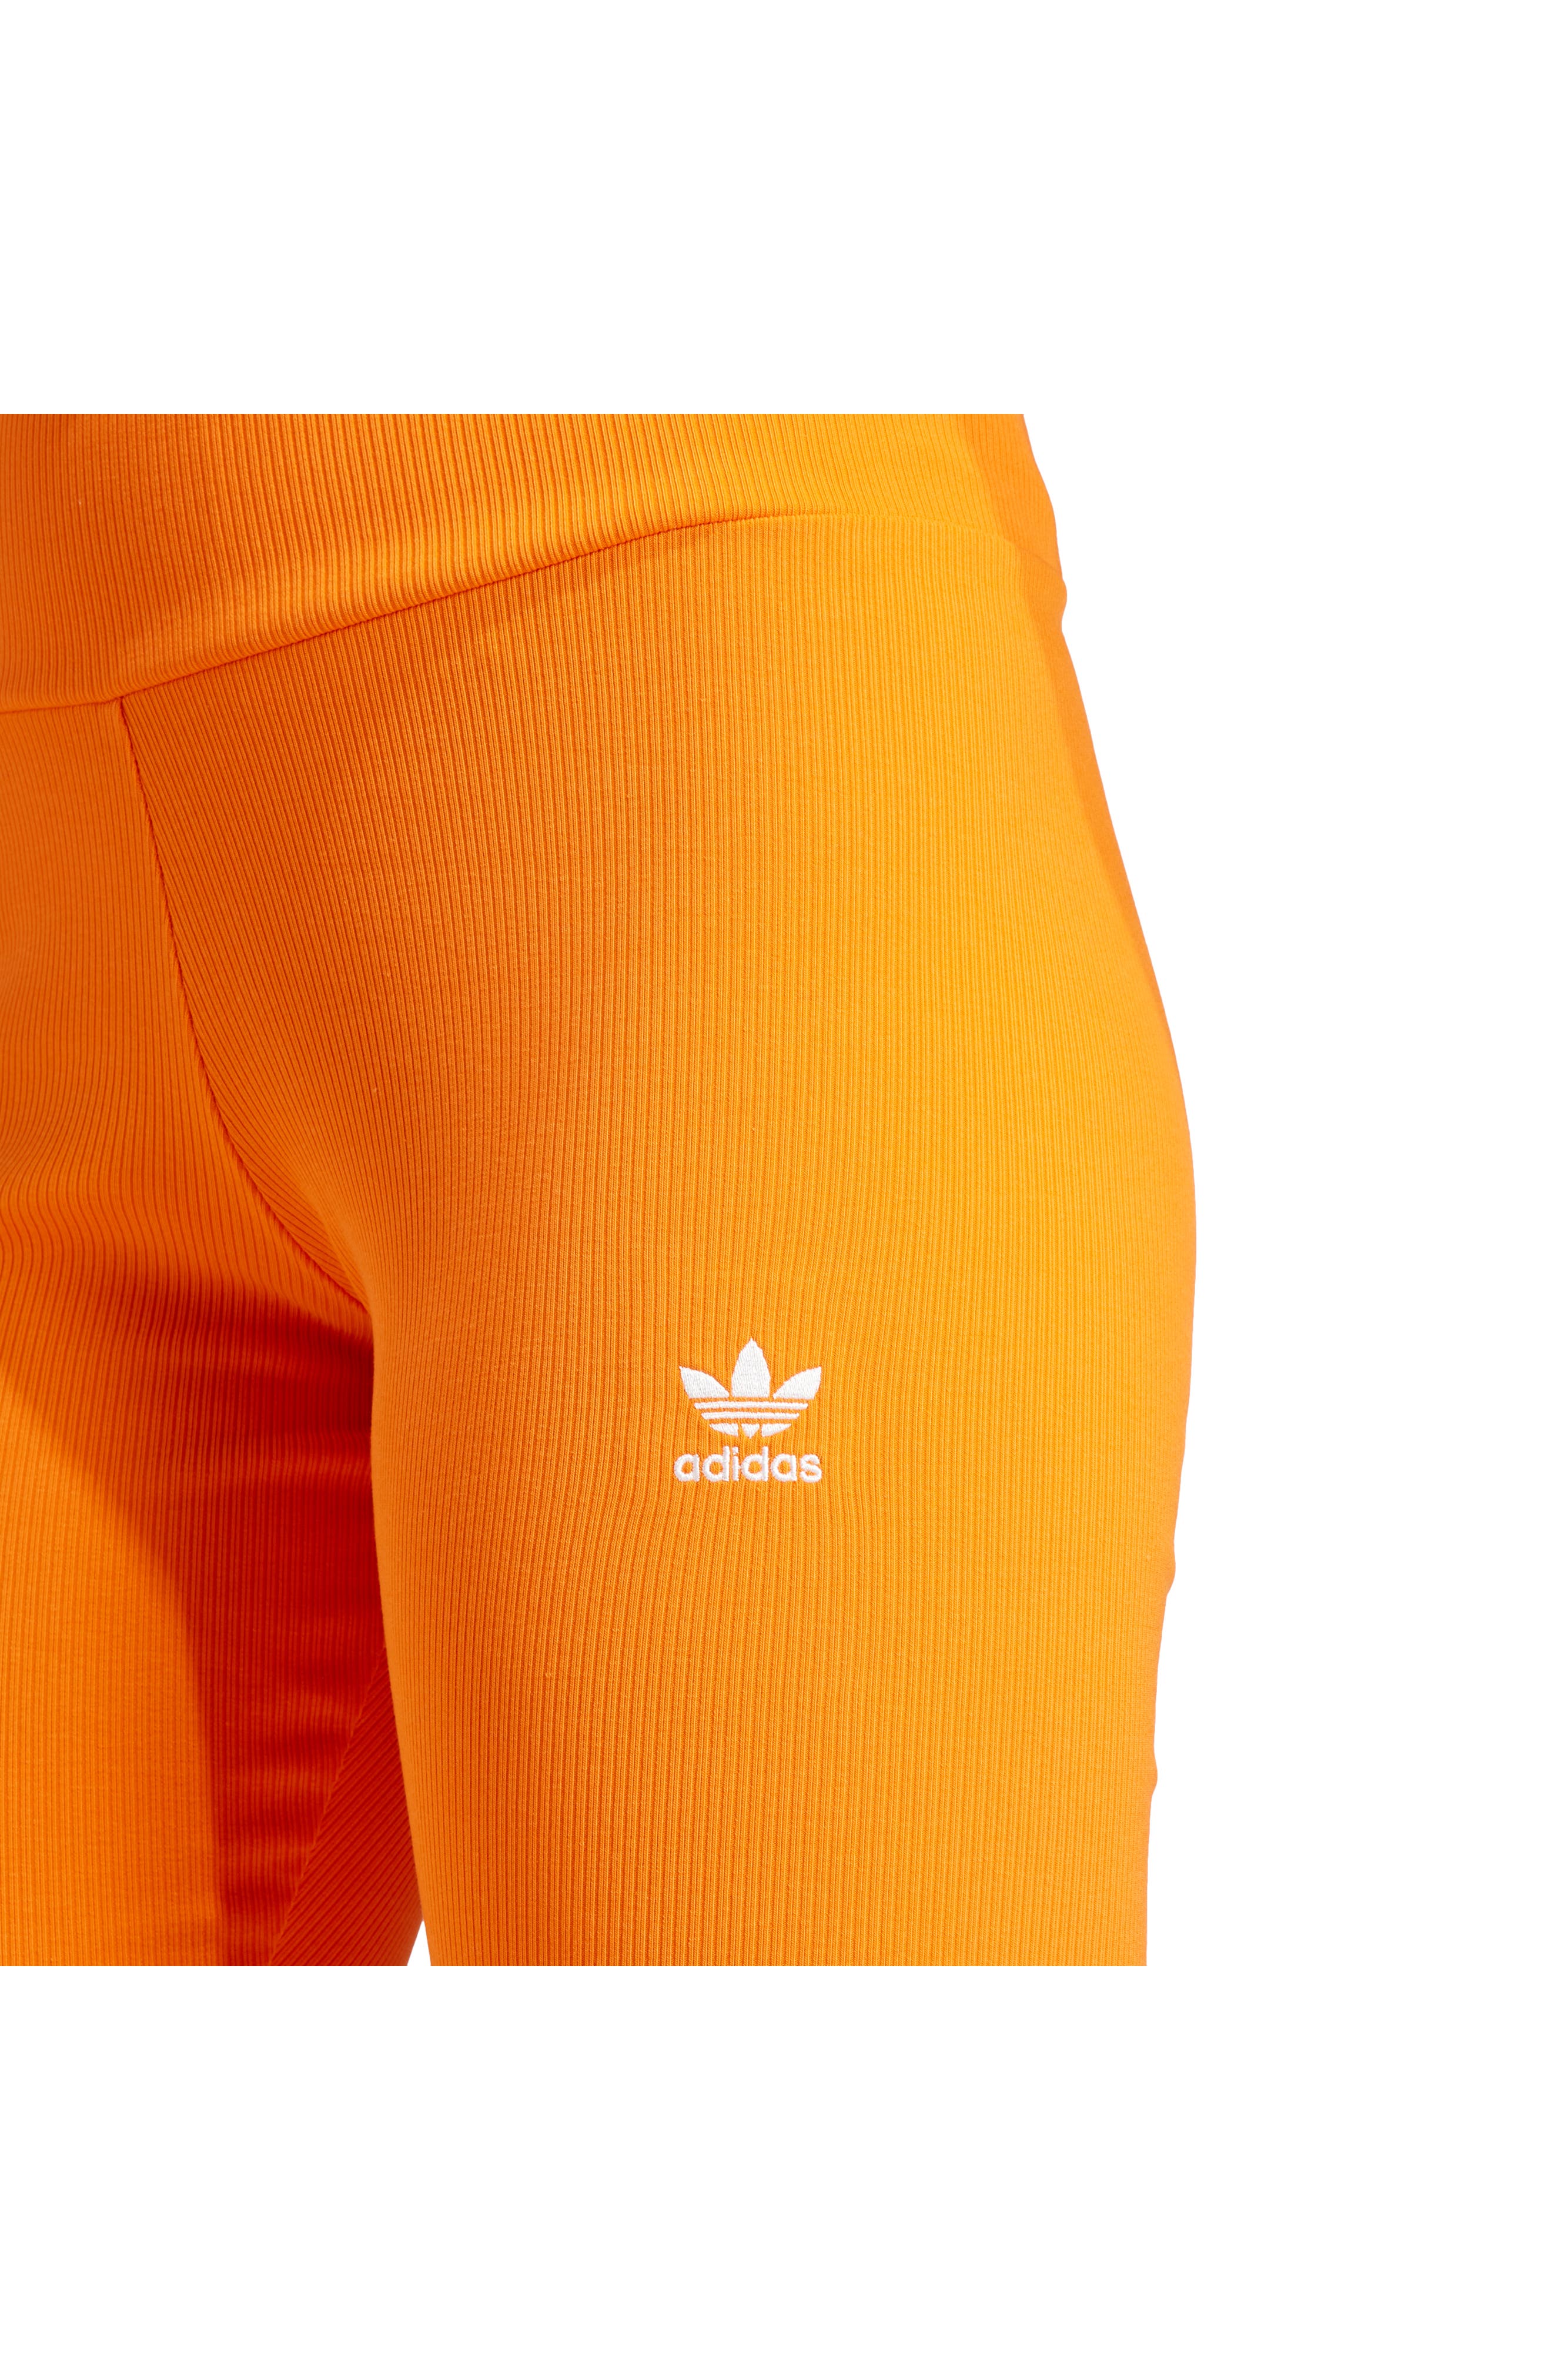 adidas Training Techfit color block high rise legging shorts in brown,  orange and purple